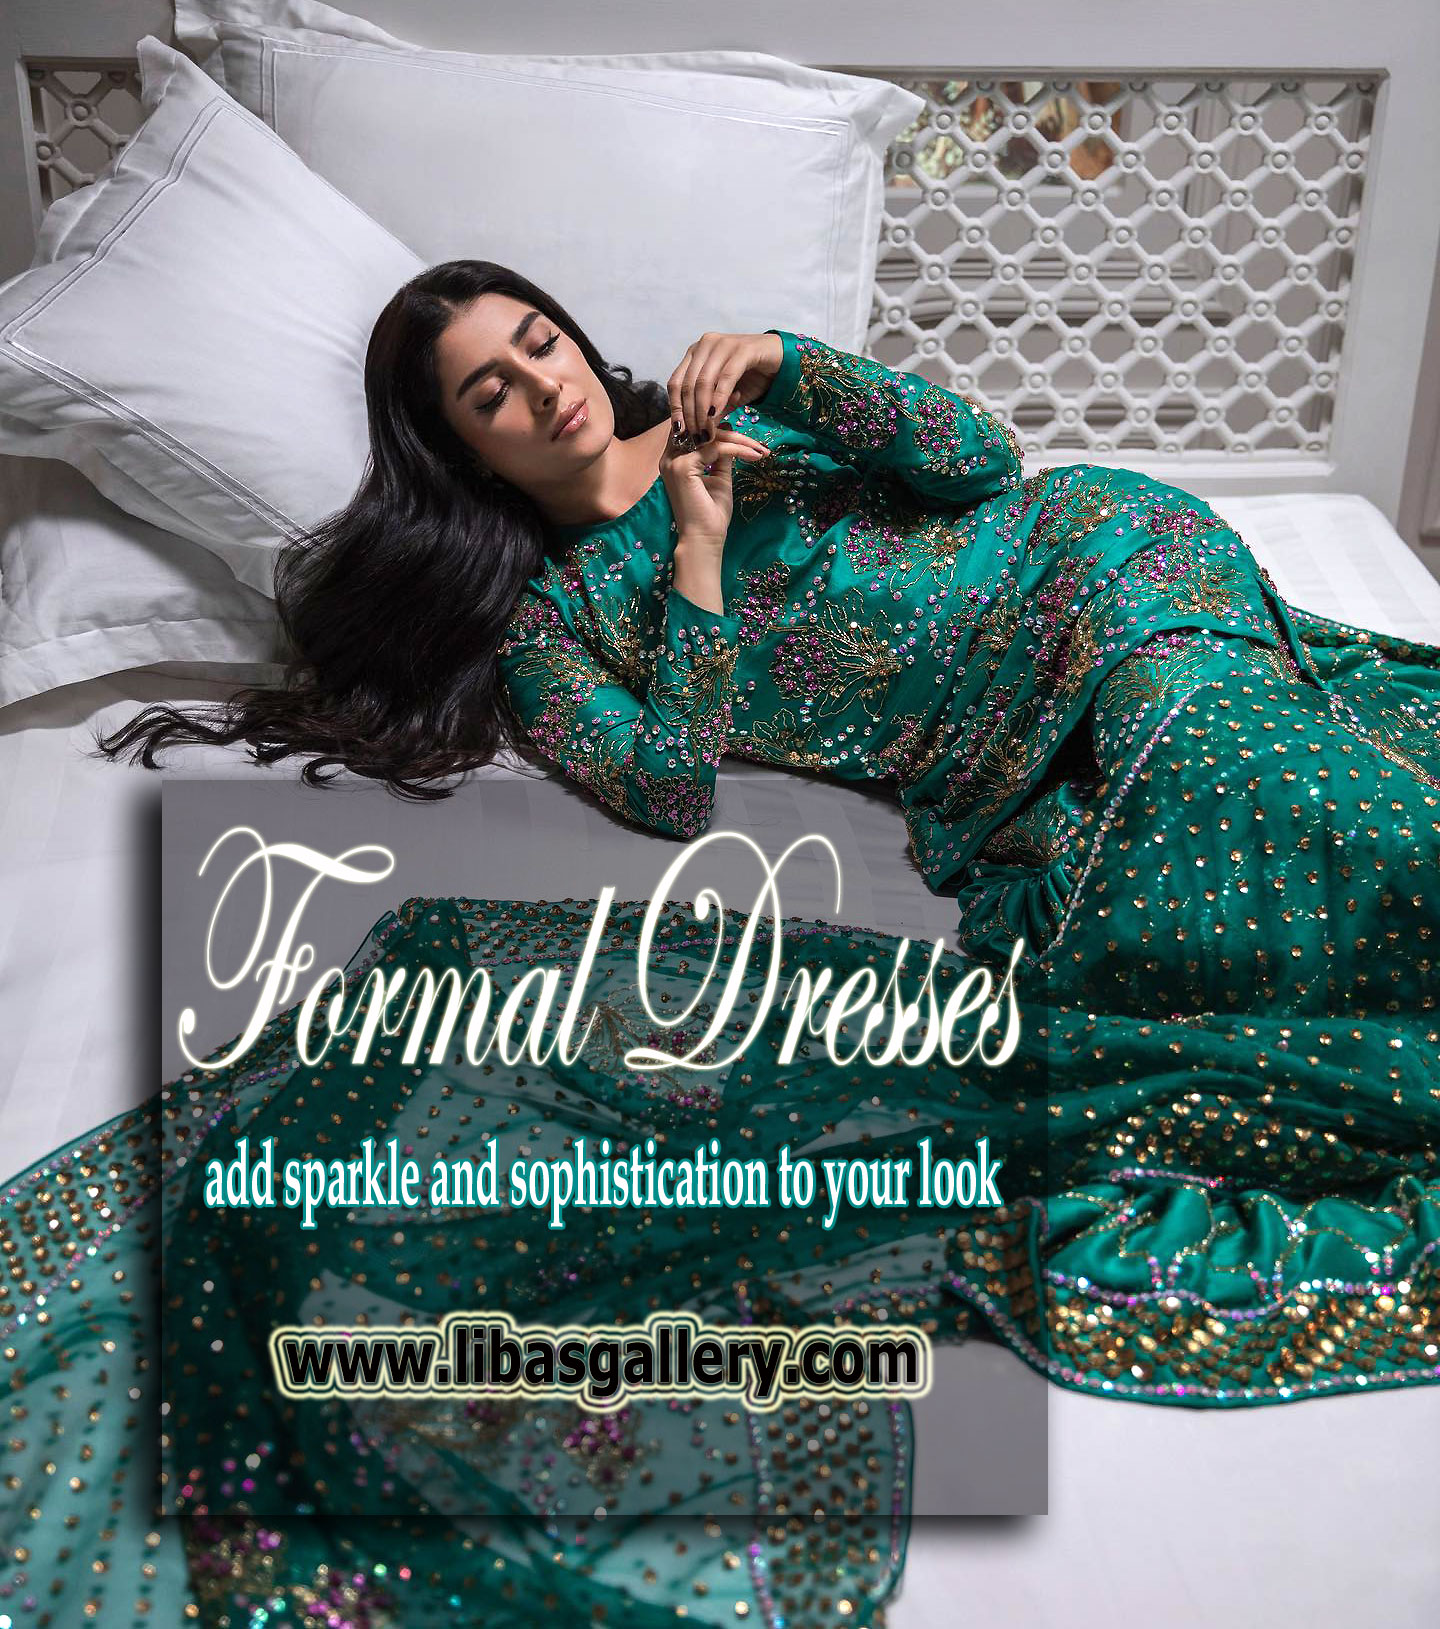 Luxury Formal Dresses Add Sparkle And Sophistication To Your Look